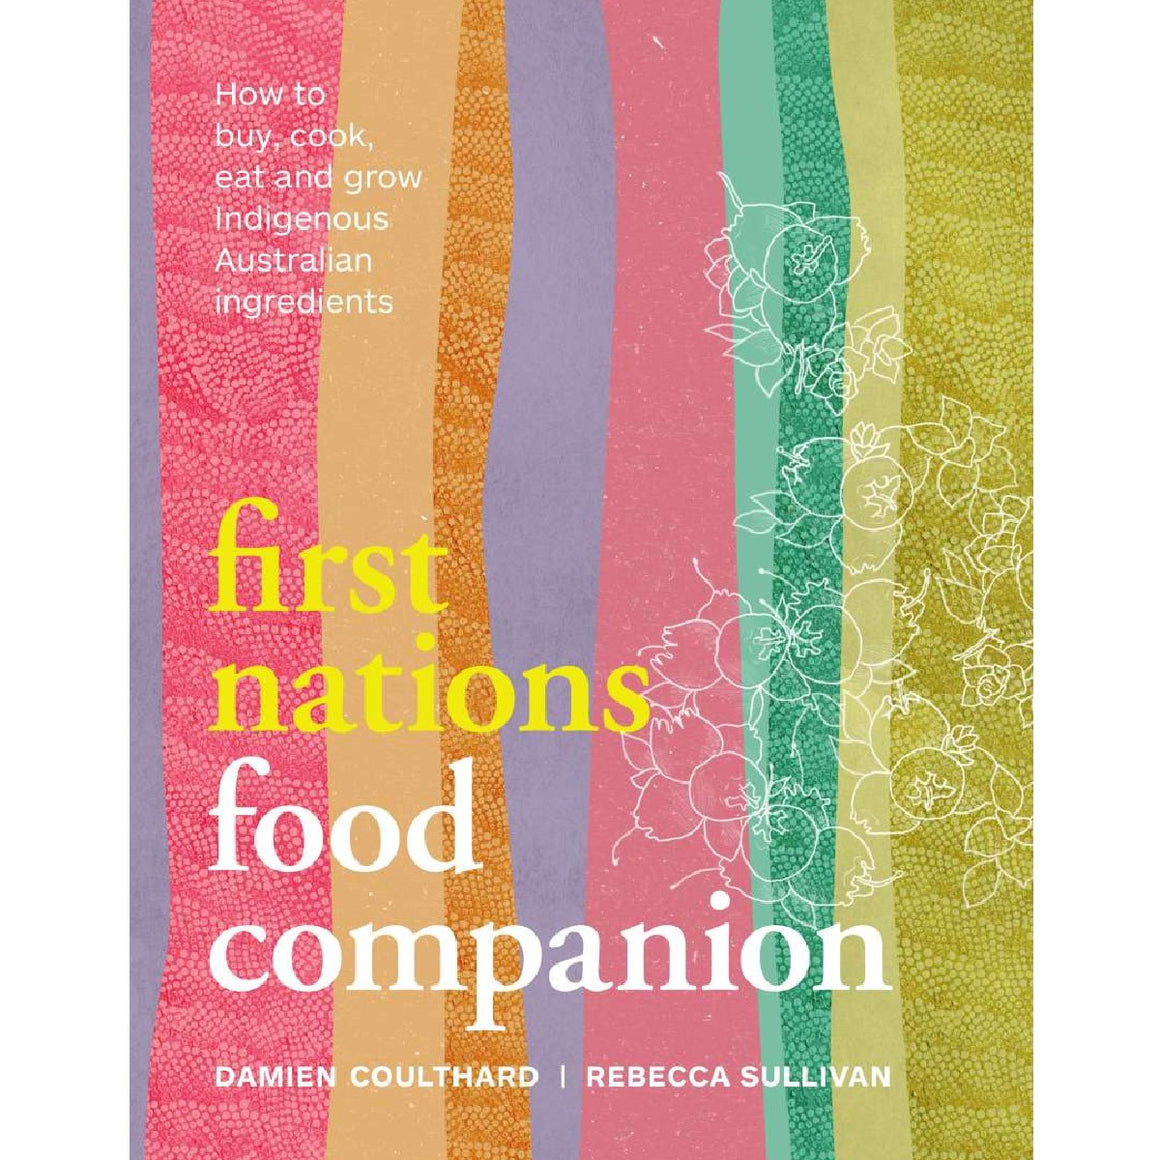 First Nations Food Companion | Author: Damien Coulthard